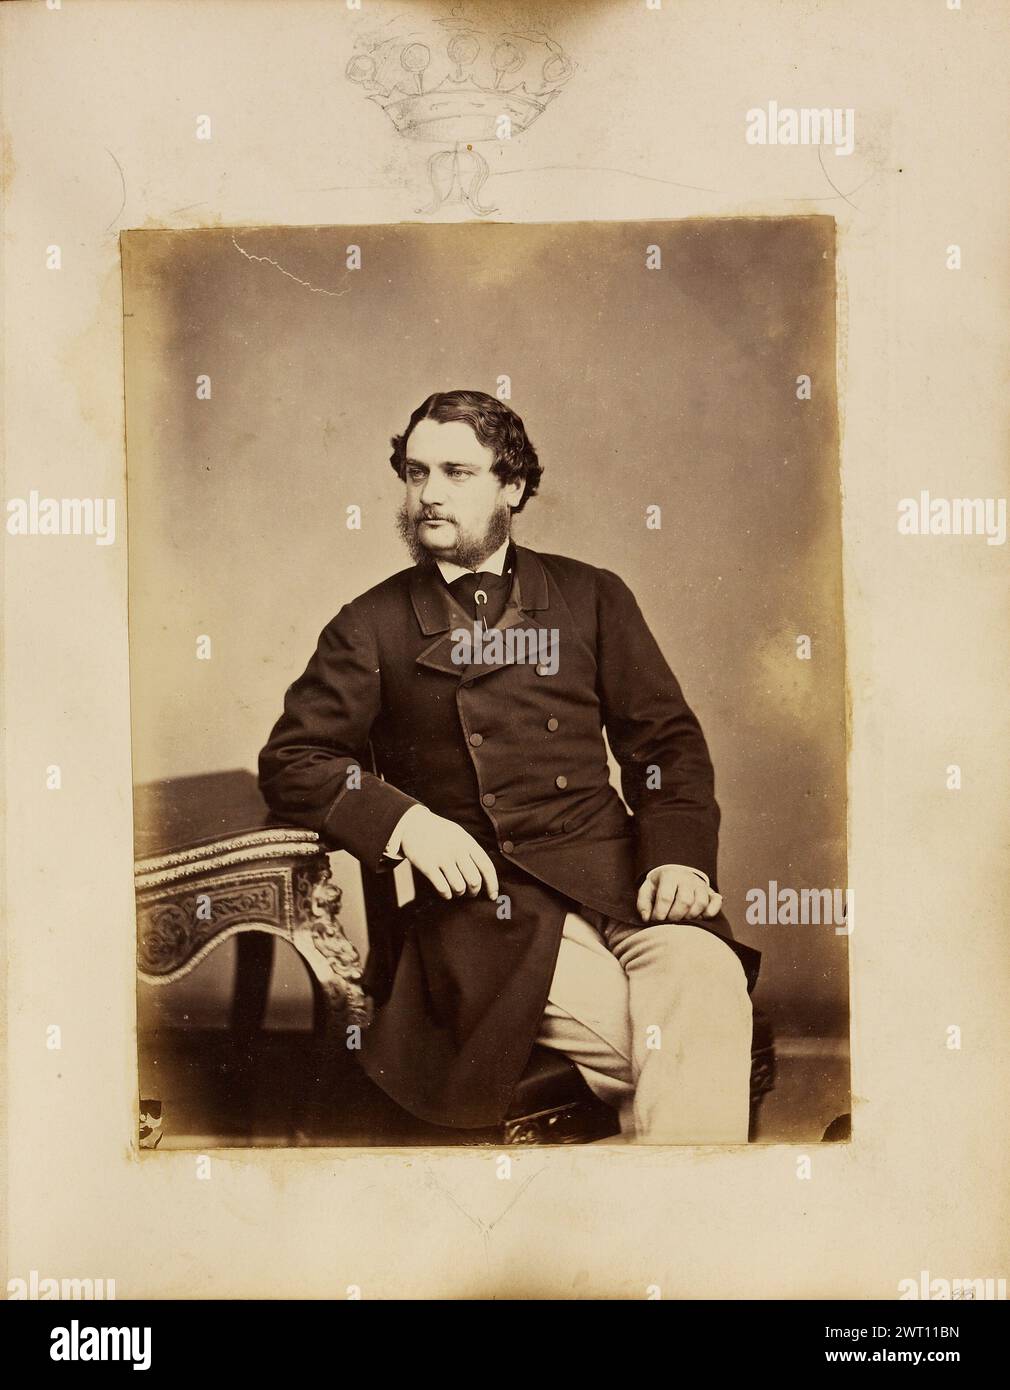 Charles Anderson-Pelham, 3rd Earl of Yarborough. Unknown, photographer about 1864 A portrait of Charles Anderson-Pelham, 3rd Earl of Yarborough. He is seated and resting one arm on a small table. His legs are crossed. There is a sketch of a crown on the album page above the portrait. Stock Photo